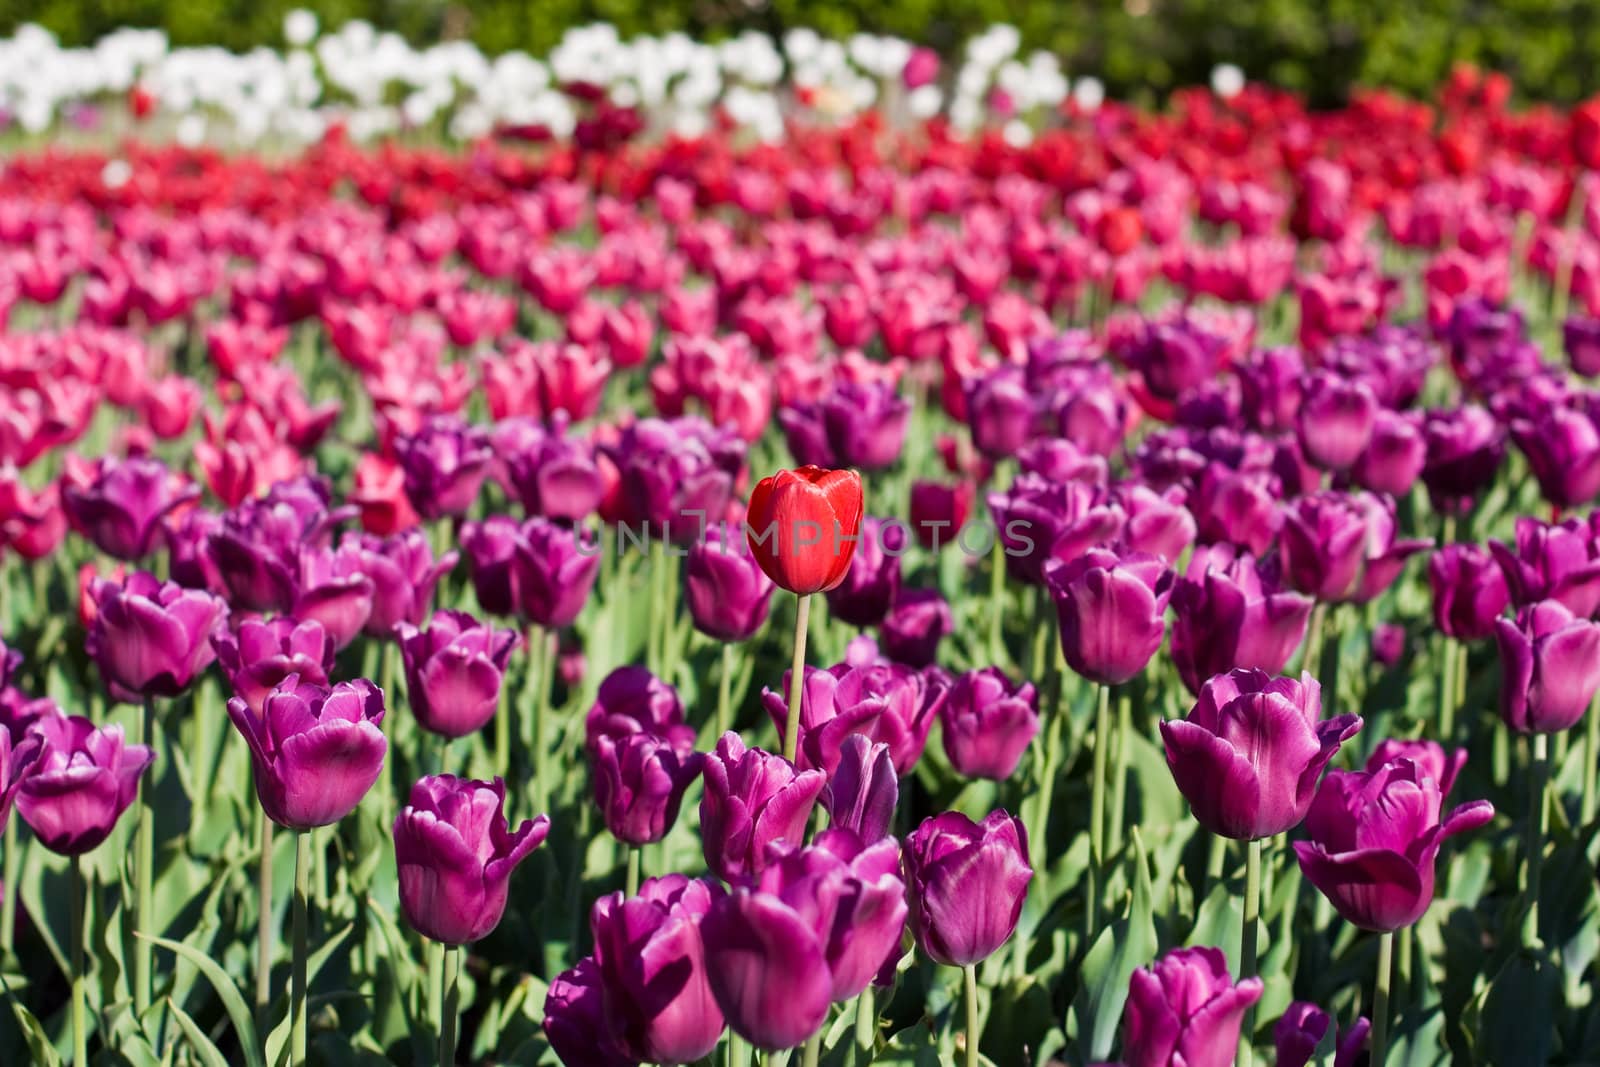 Field with violet tulipss with single red tulip in centre